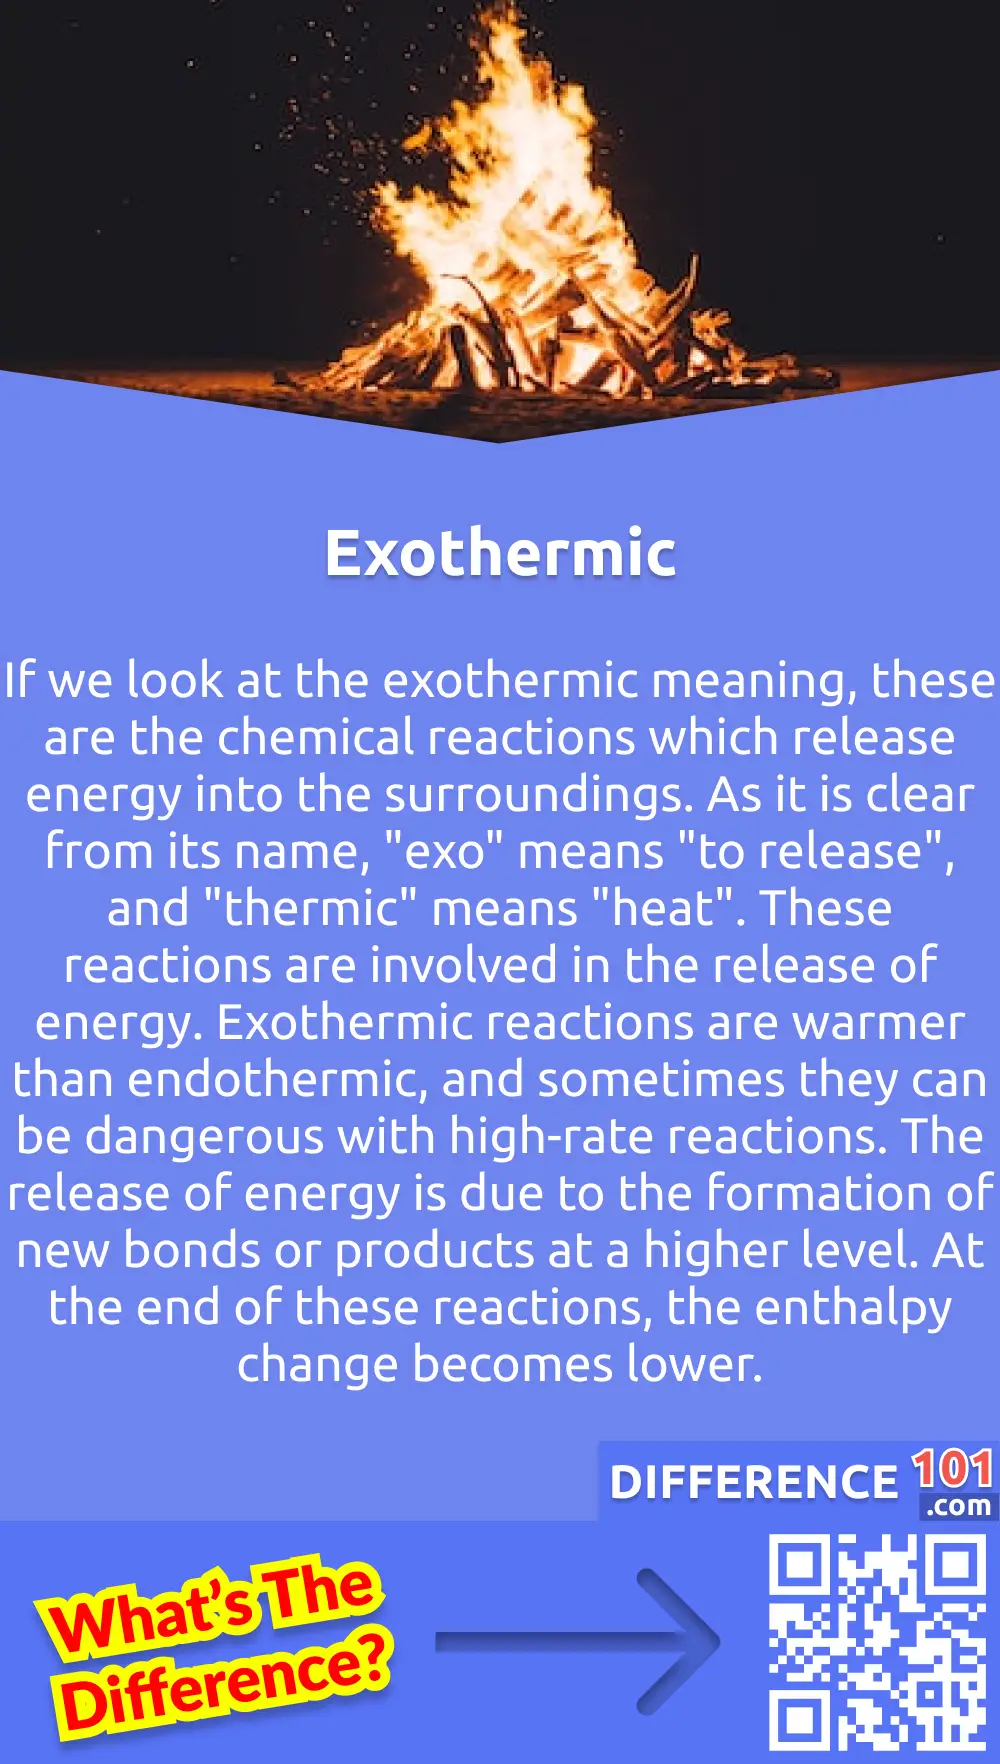 What Are Exothermic Reactions? If we look at the exothermic meaning, these are the chemical reactions which release energy into the surroundings. As it is clear from its name, "exo" means "to release", and "thermic" means "heat". These reactions are involved in the release of energy. Some of the common examples of exothermic reactions are burning a substance, reactions of fuels, deposition of dry ice, and respiration. Exothermic reactions are warmer than endothermic, and sometimes they can be dangerous with high-rate reactions. The release of energy is due to the formation of new bonds or products at a higher level. At the end of these reactions, the enthalpy change becomes lower. No matter what reaction it is, it requires a lot of energy, which is used to hold the bonds holding the molecules together.
